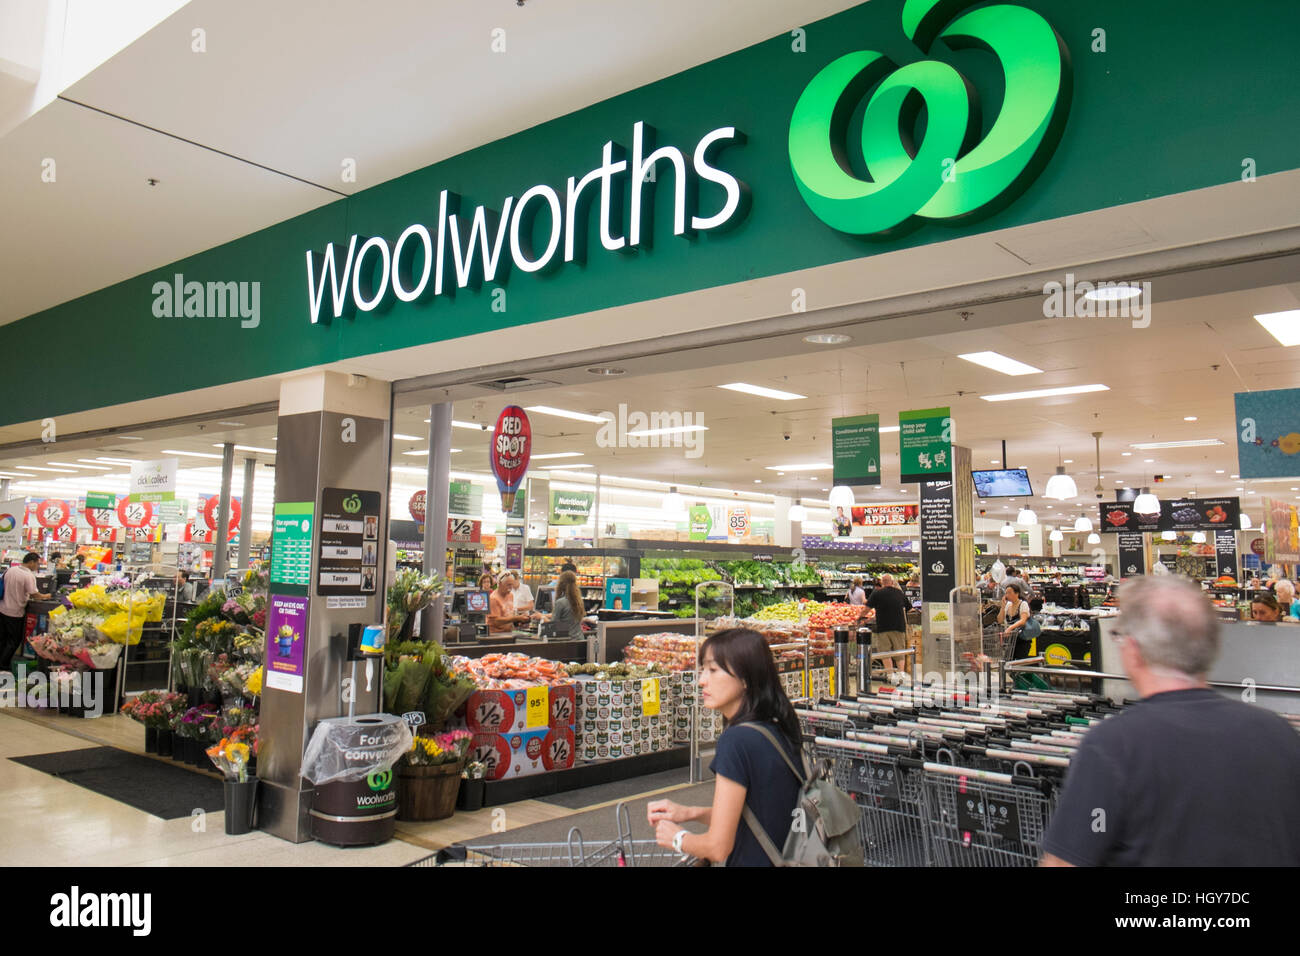 Woolworths supermarket grocery store in north Sydney,Australia Stock Photo